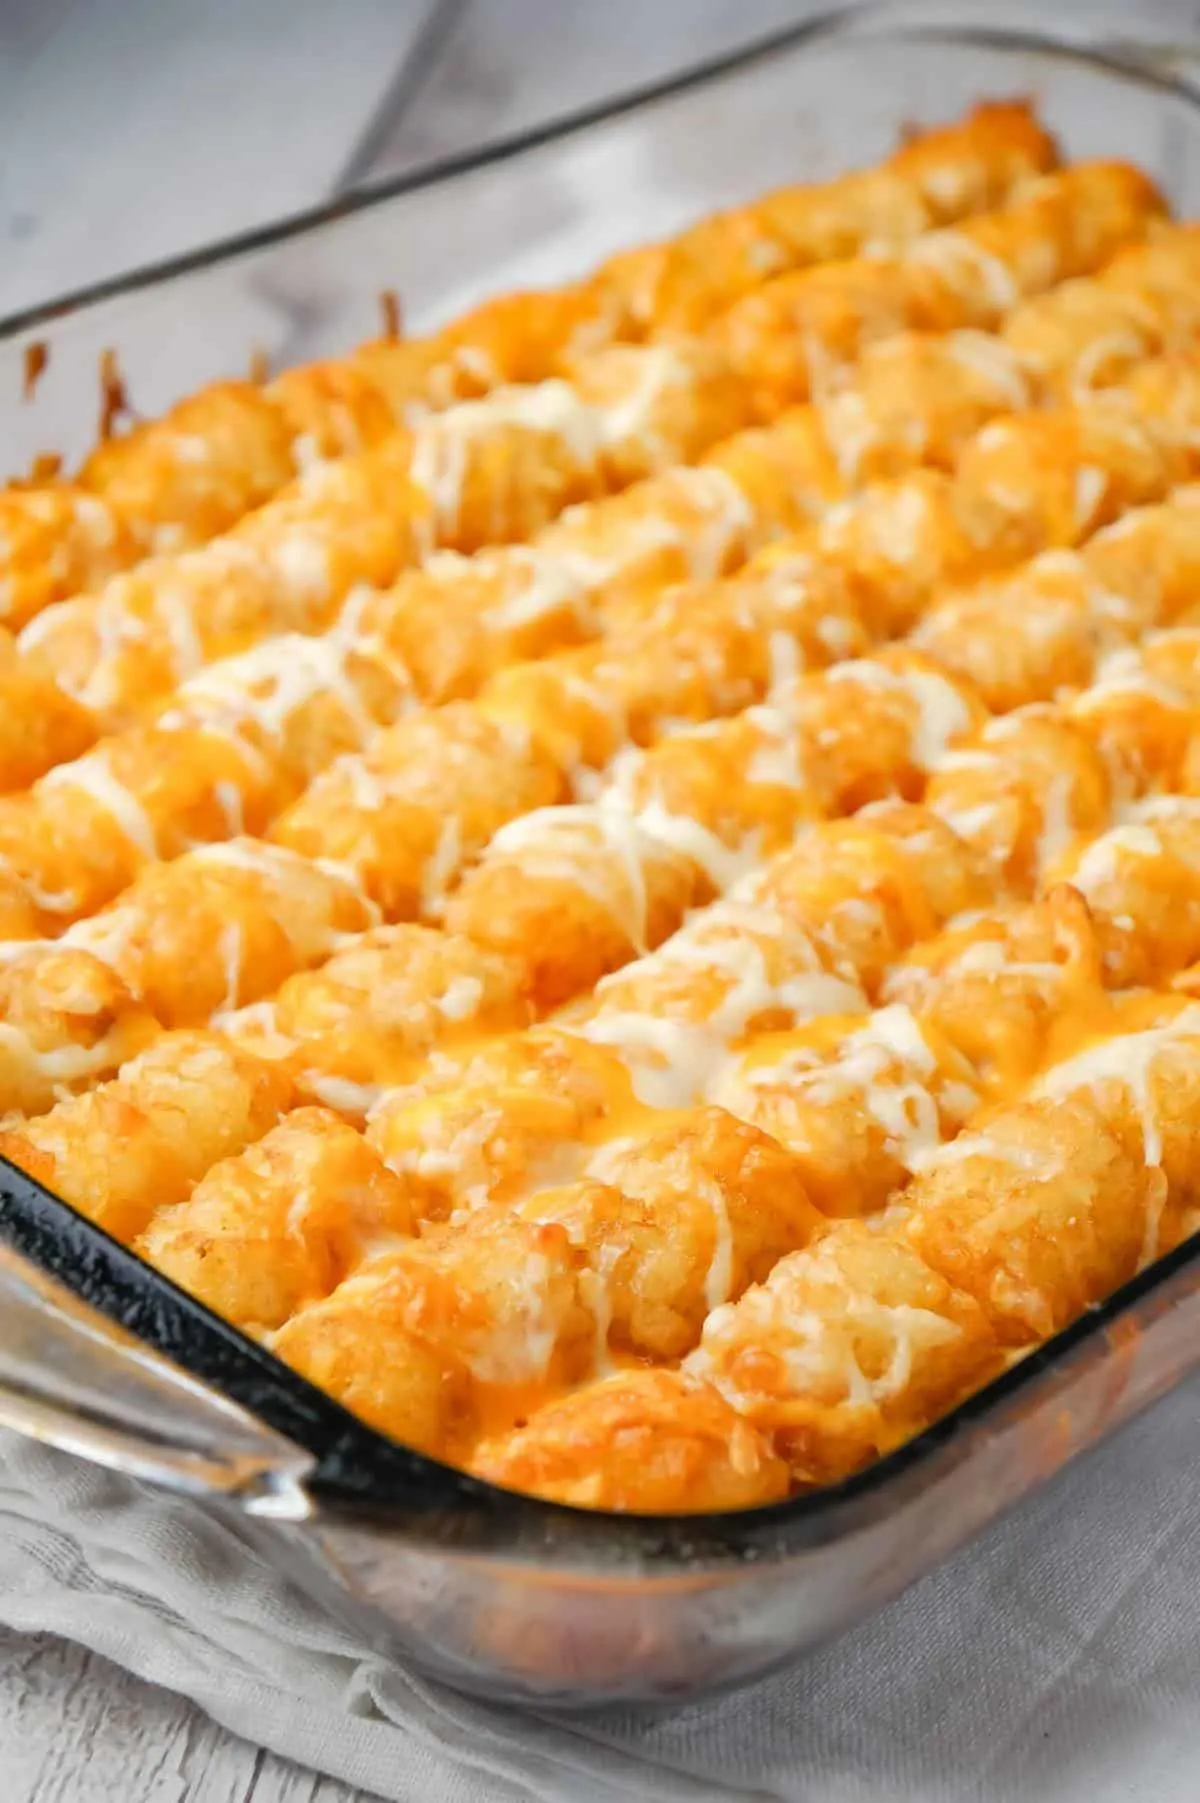 Dr Pepper Pork Tater Tot Casserole is a hearty dish with a base of ground pork cooked in Dr Pepper and BBQ sauce and topped with tater tots and shredded cheese.